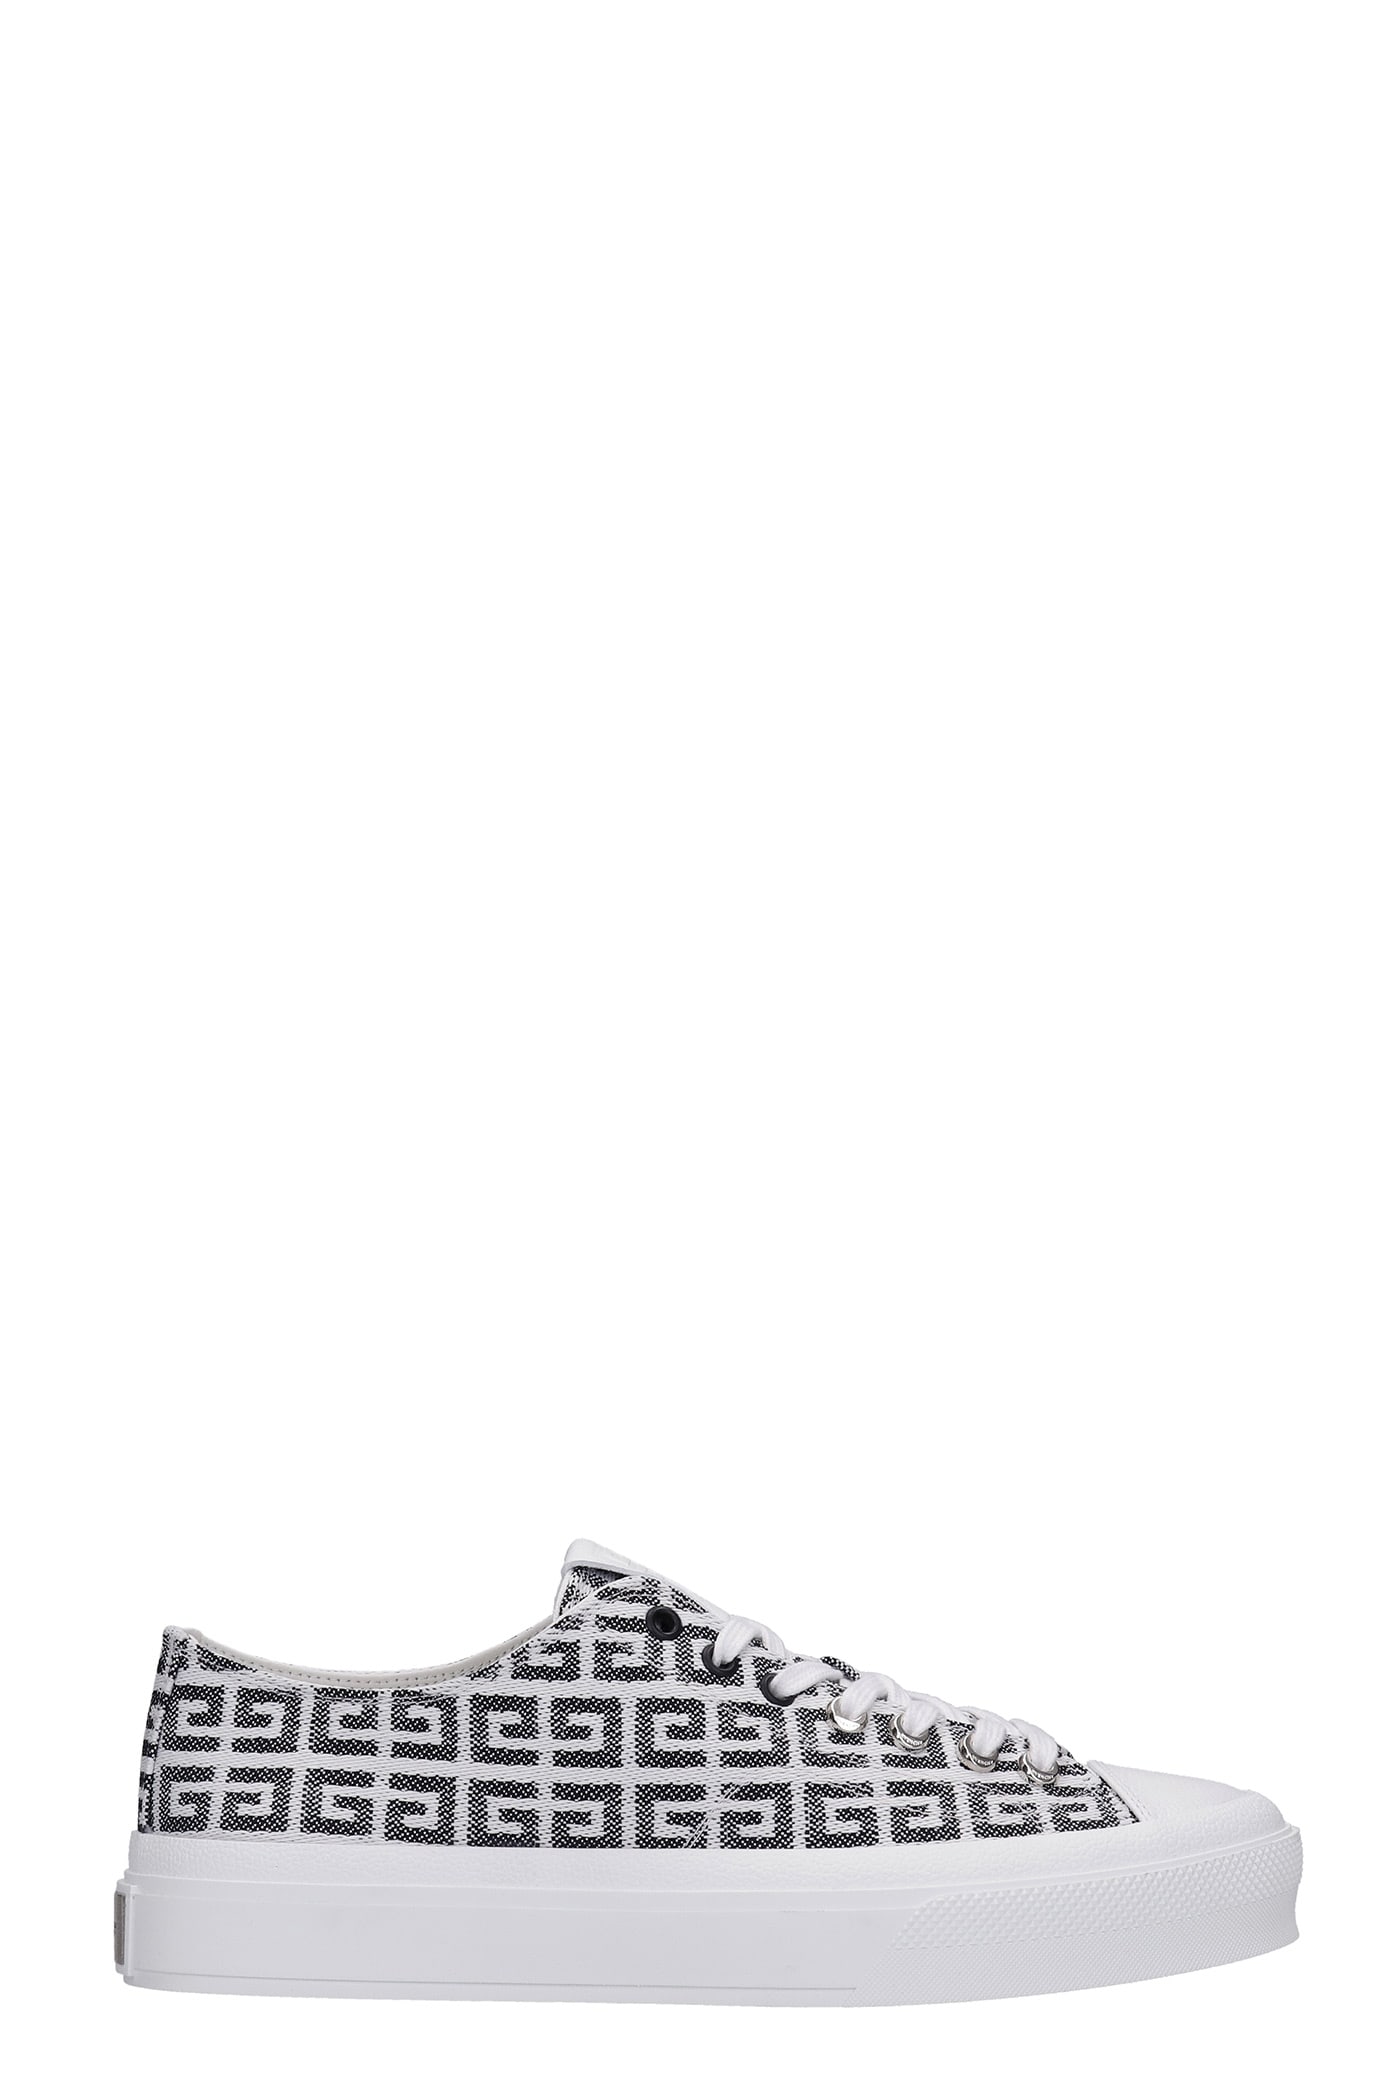 Givenchy City Low Sneakers In Black Polyester